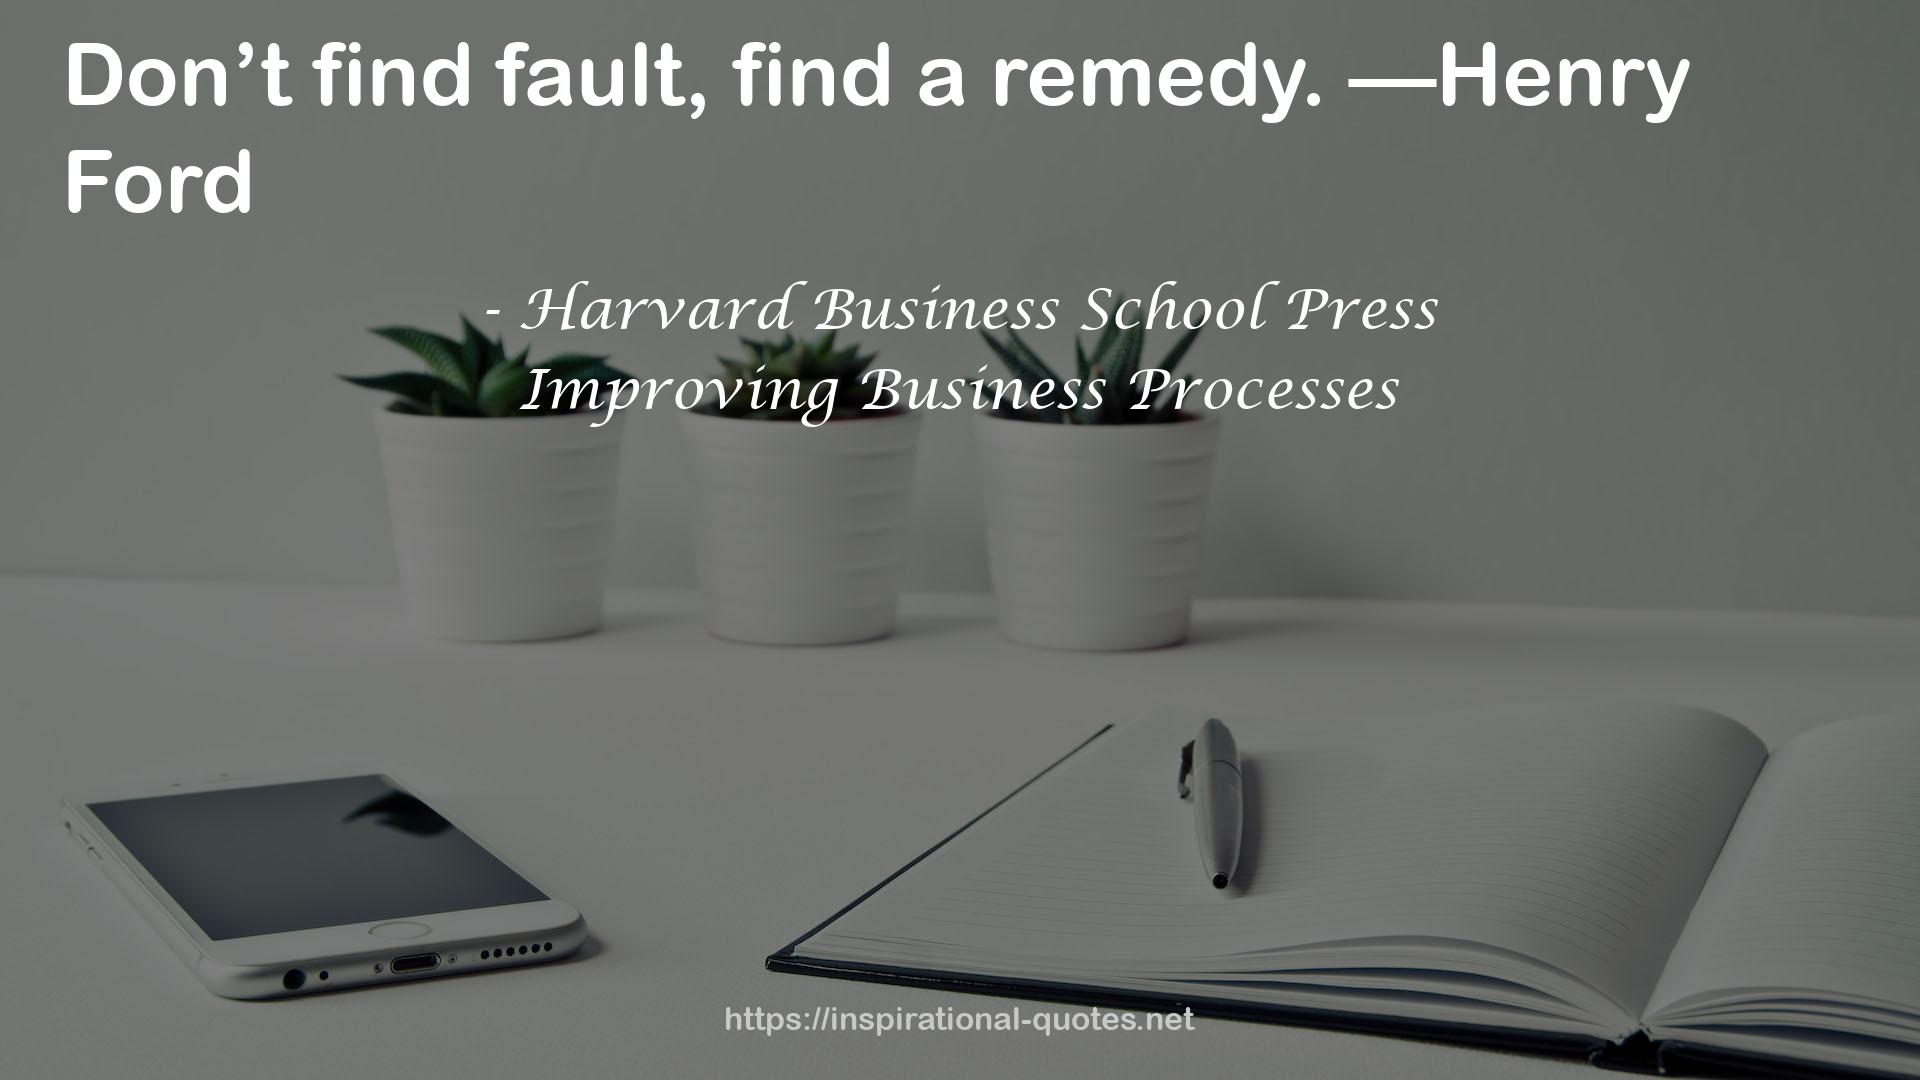 Improving Business Processes QUOTES